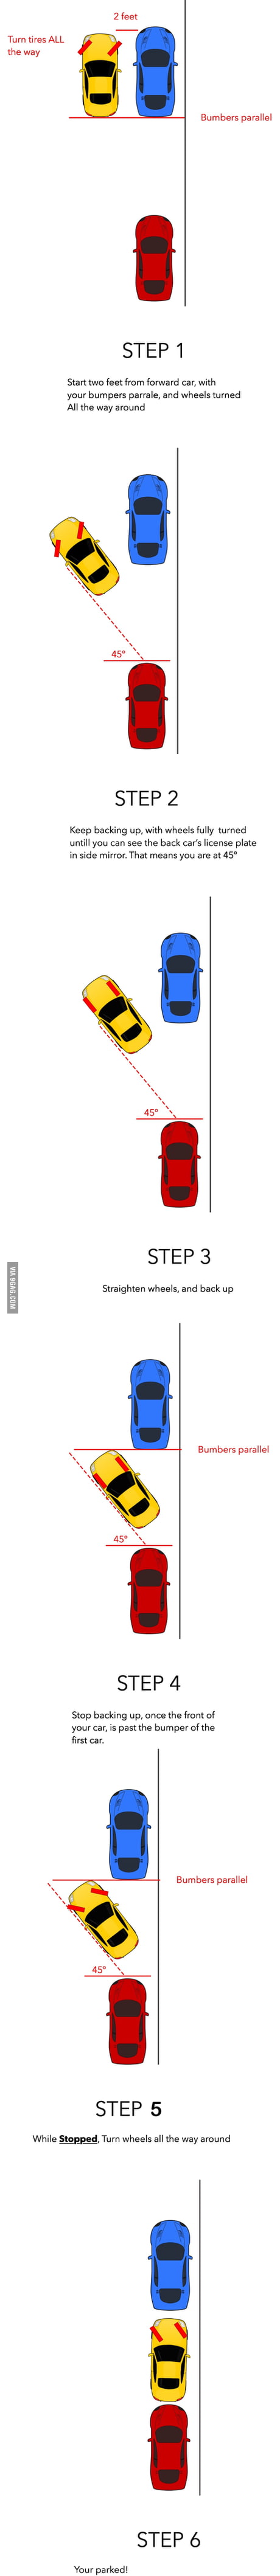 Parallel Parking Hack (Taught to me by a bus driver) - 9GAG